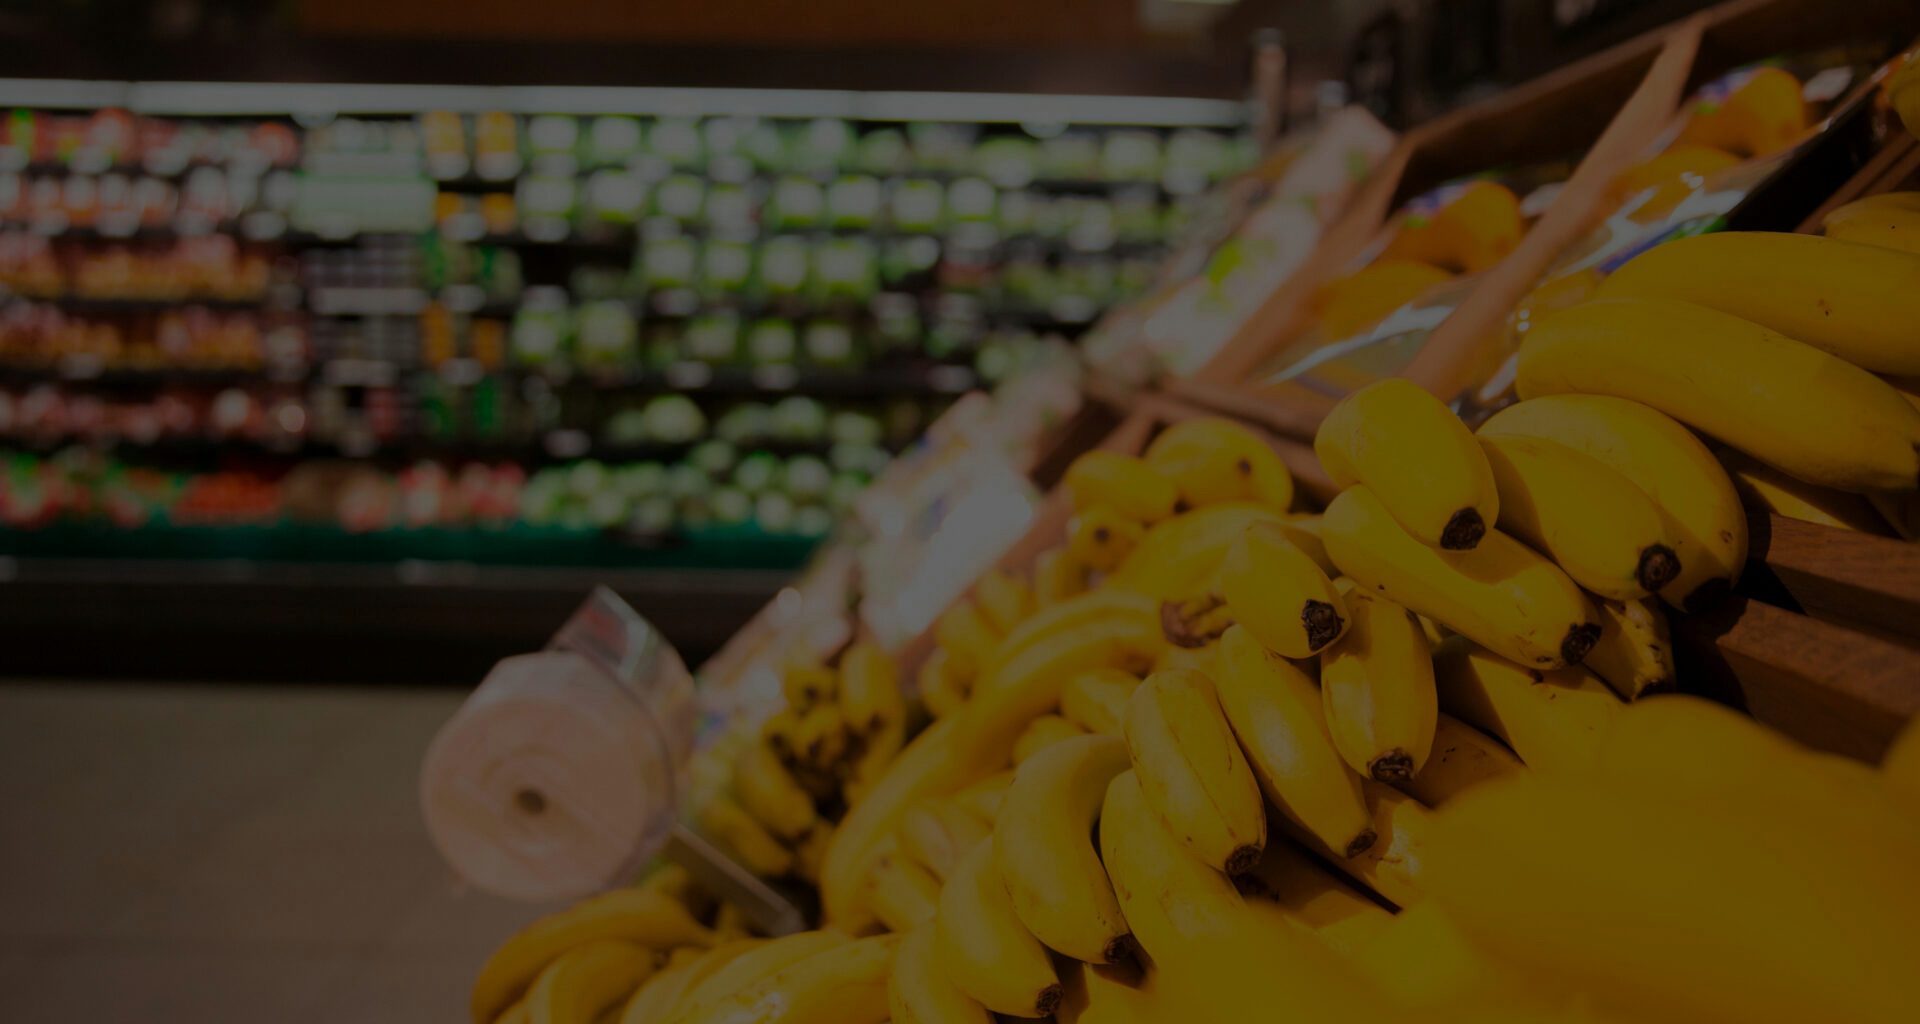 Bananas for sale in a supermarket